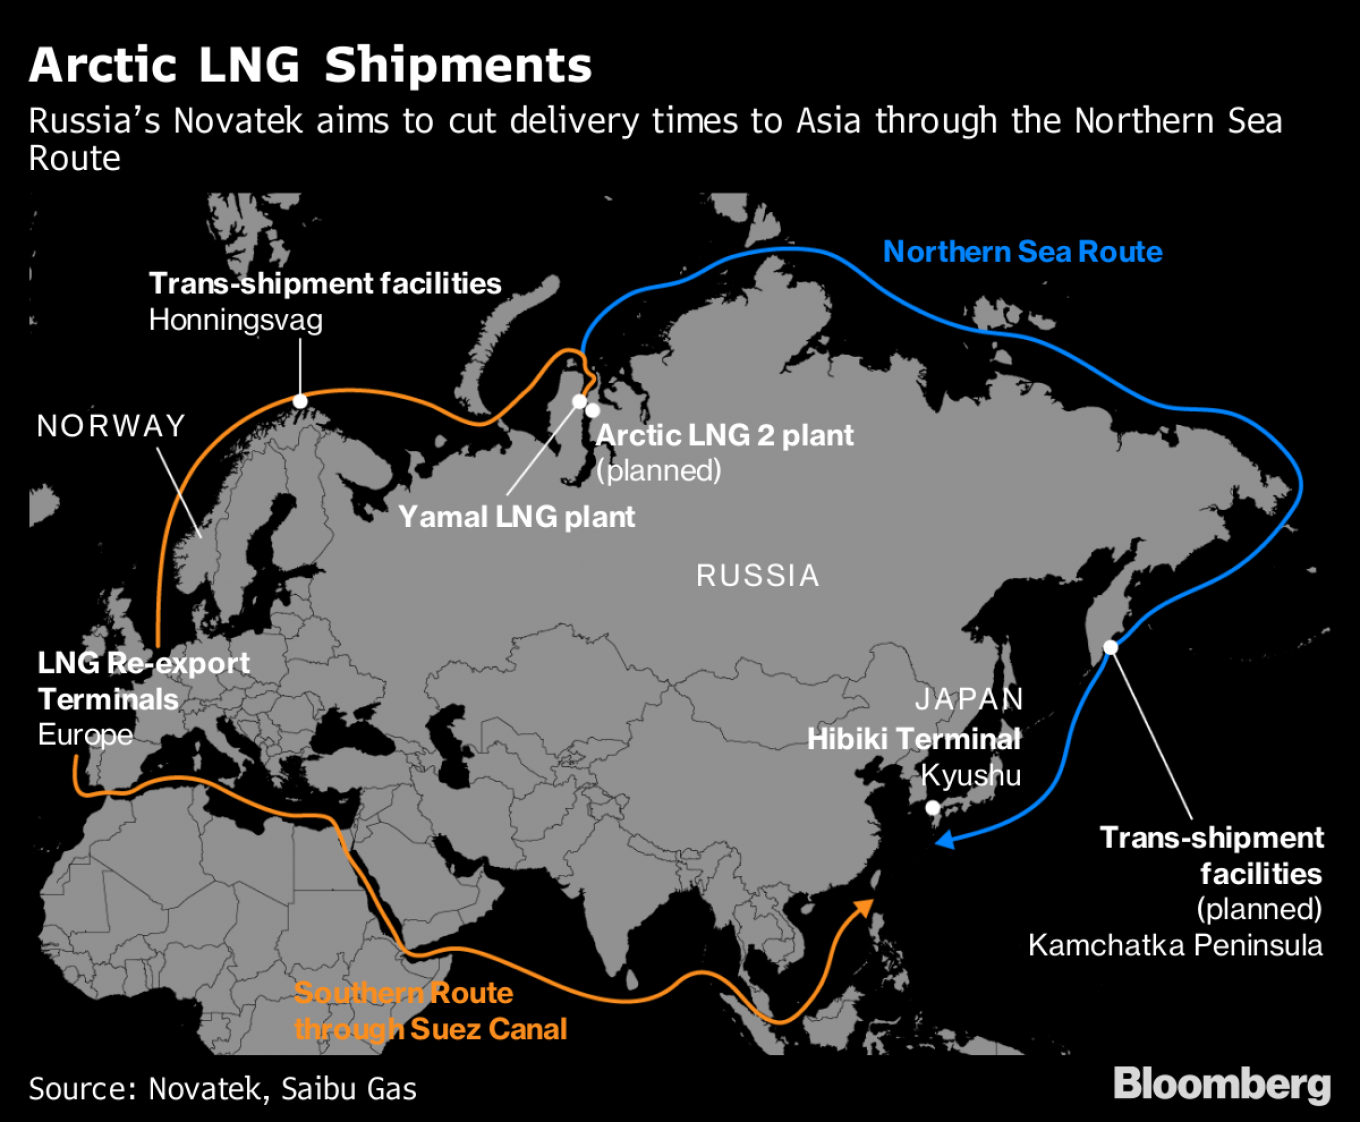 Russia Eyes Greater Energy Dominance With Arctic LNG Push